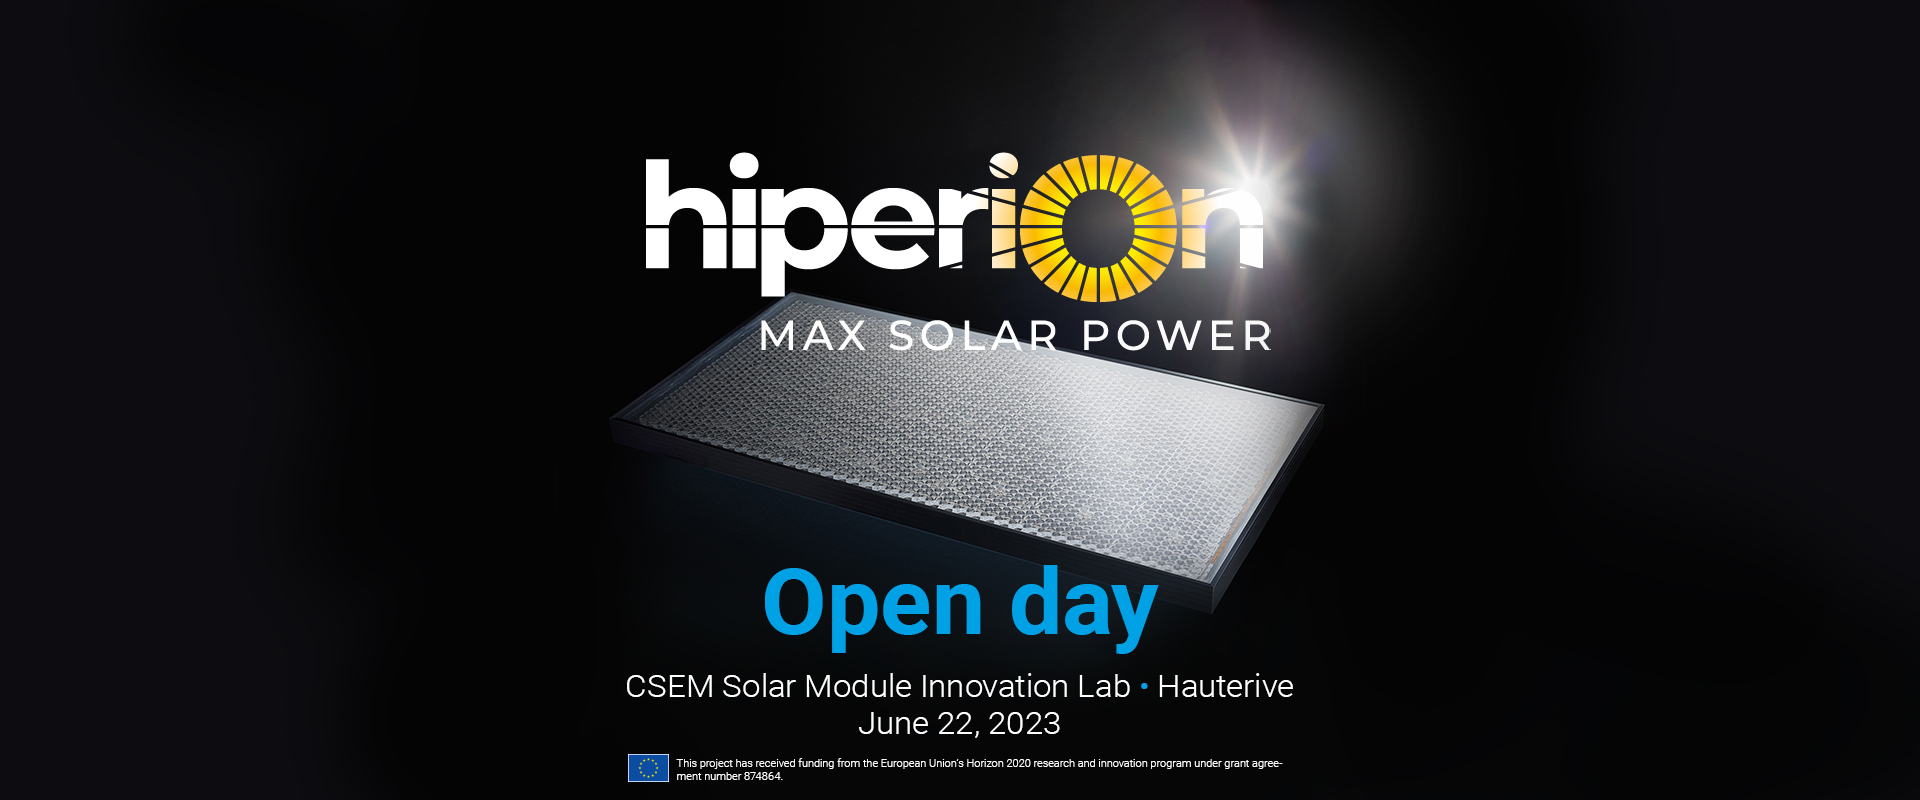 HIPERION Open Day: Come discover the world's most efficient flat PV panels